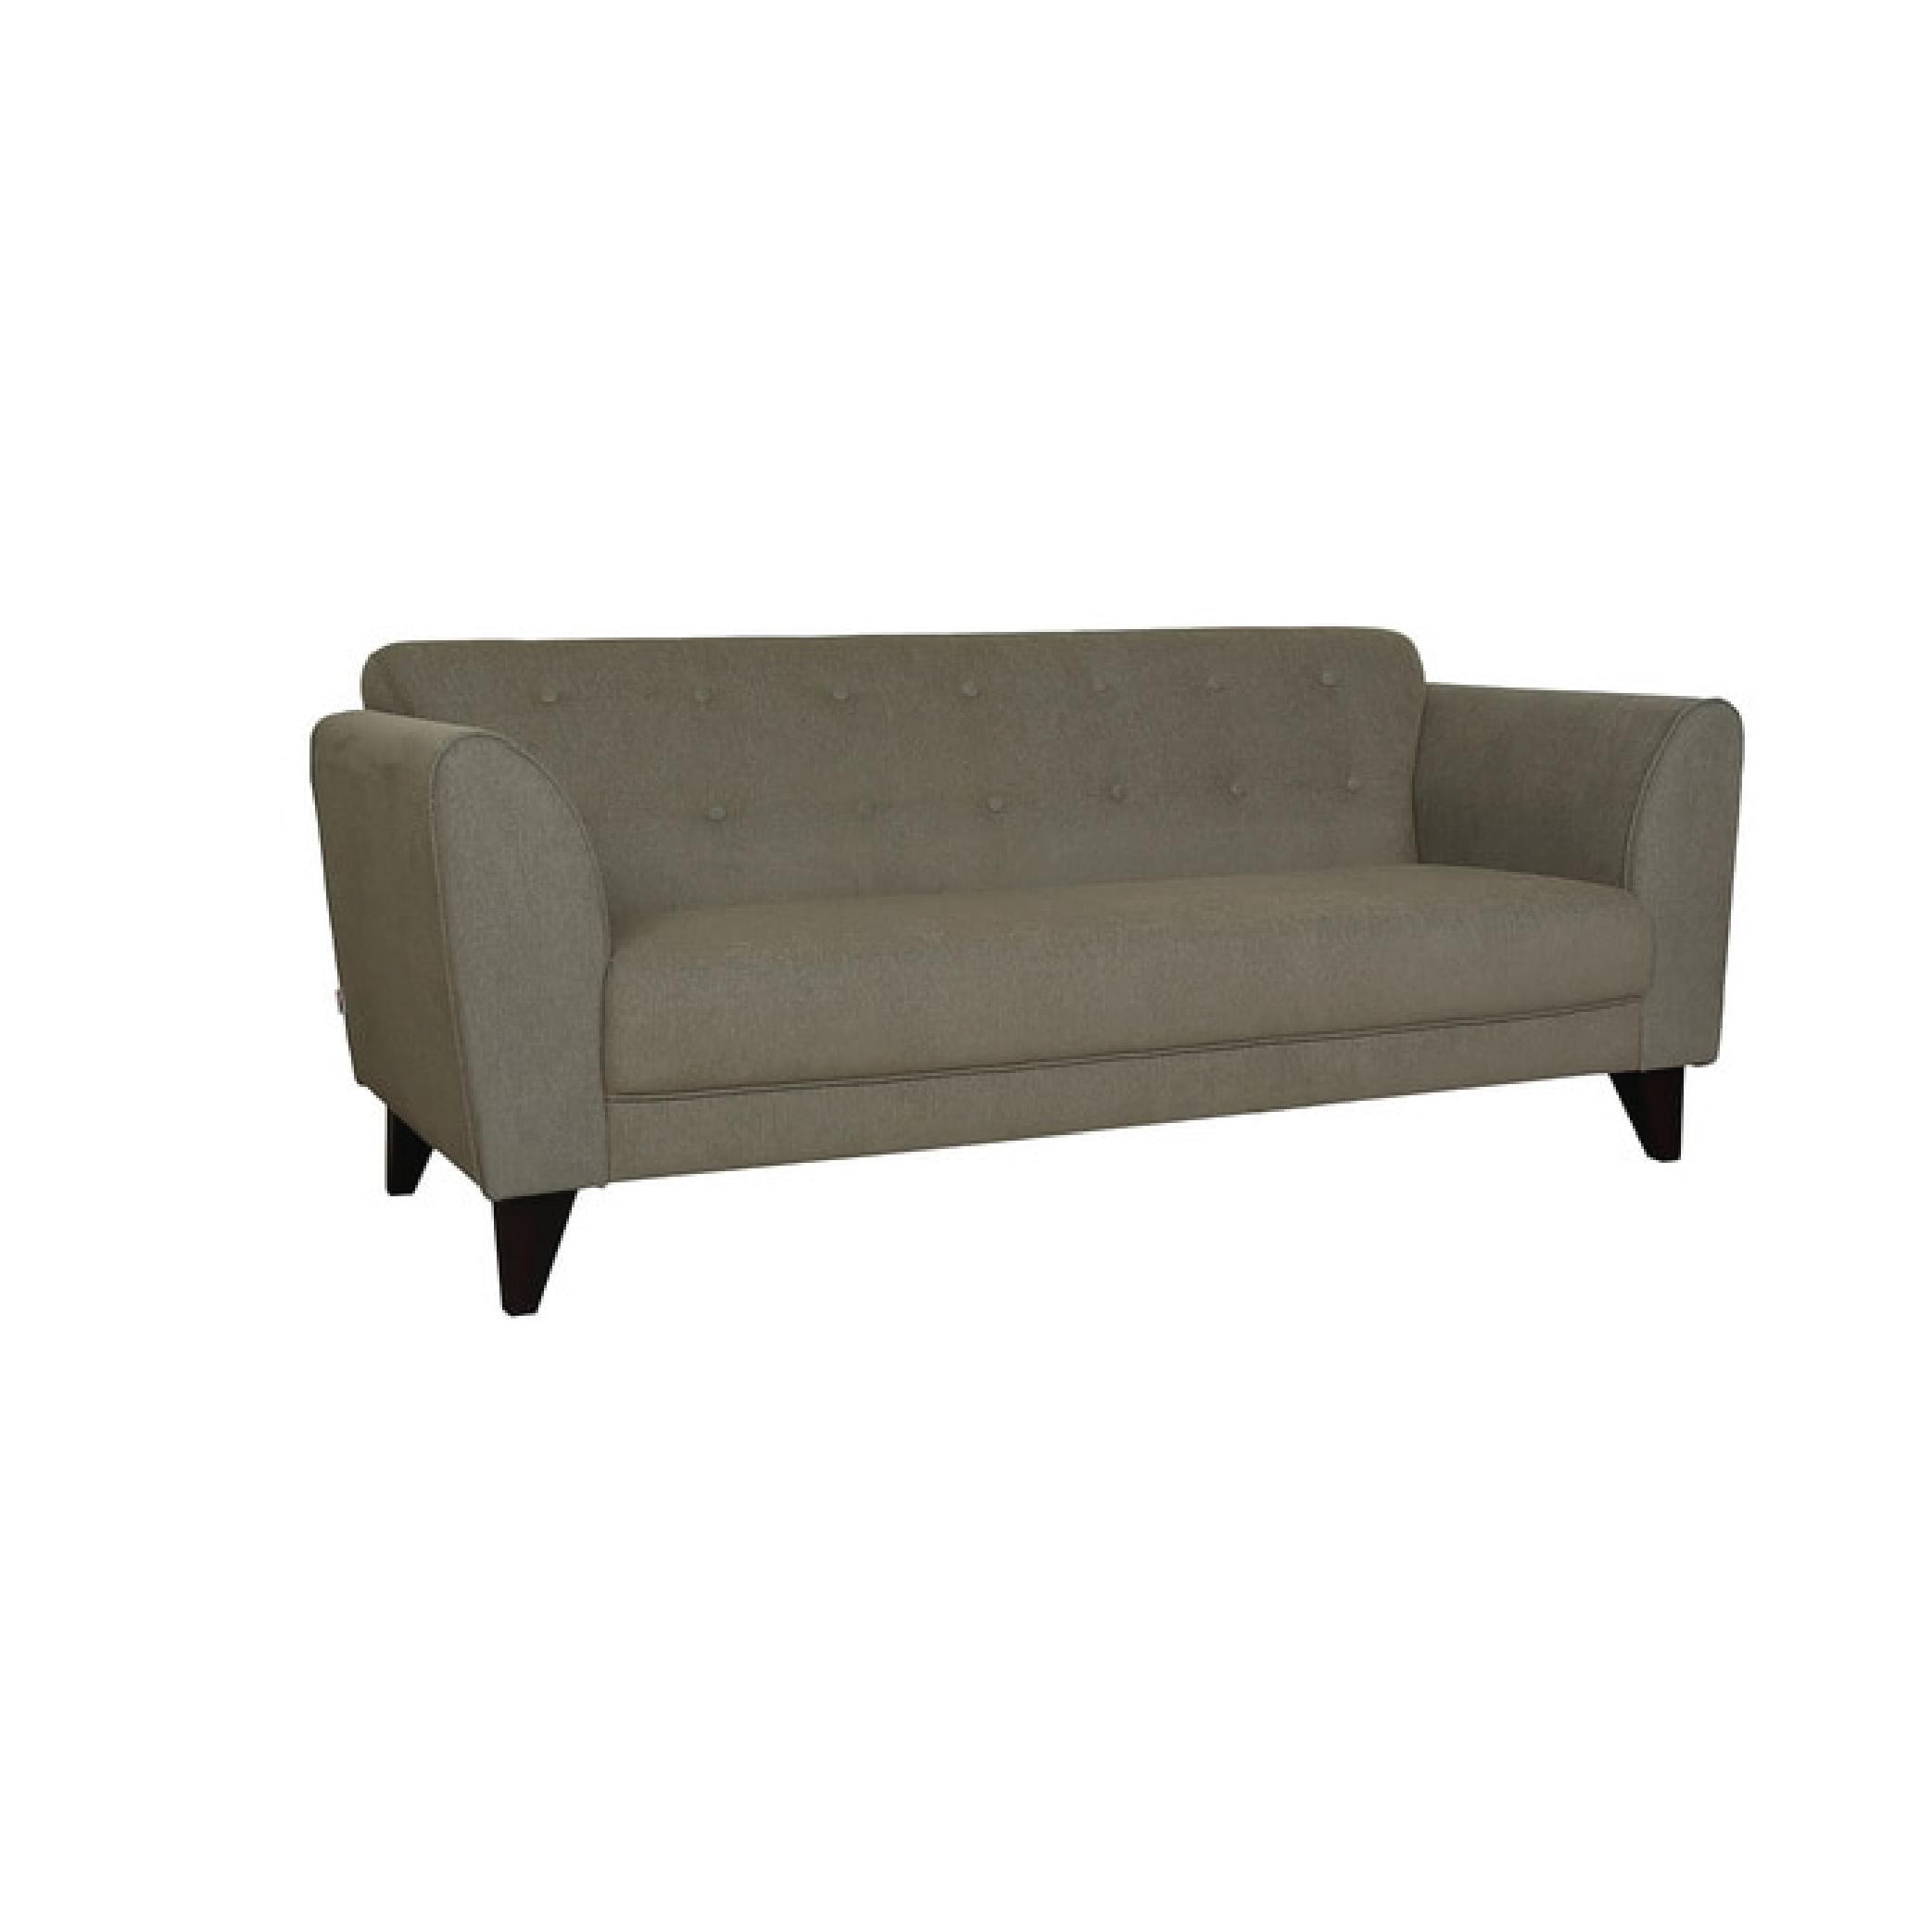 Ortici Three Seater Sofa in Sandy Brown Color